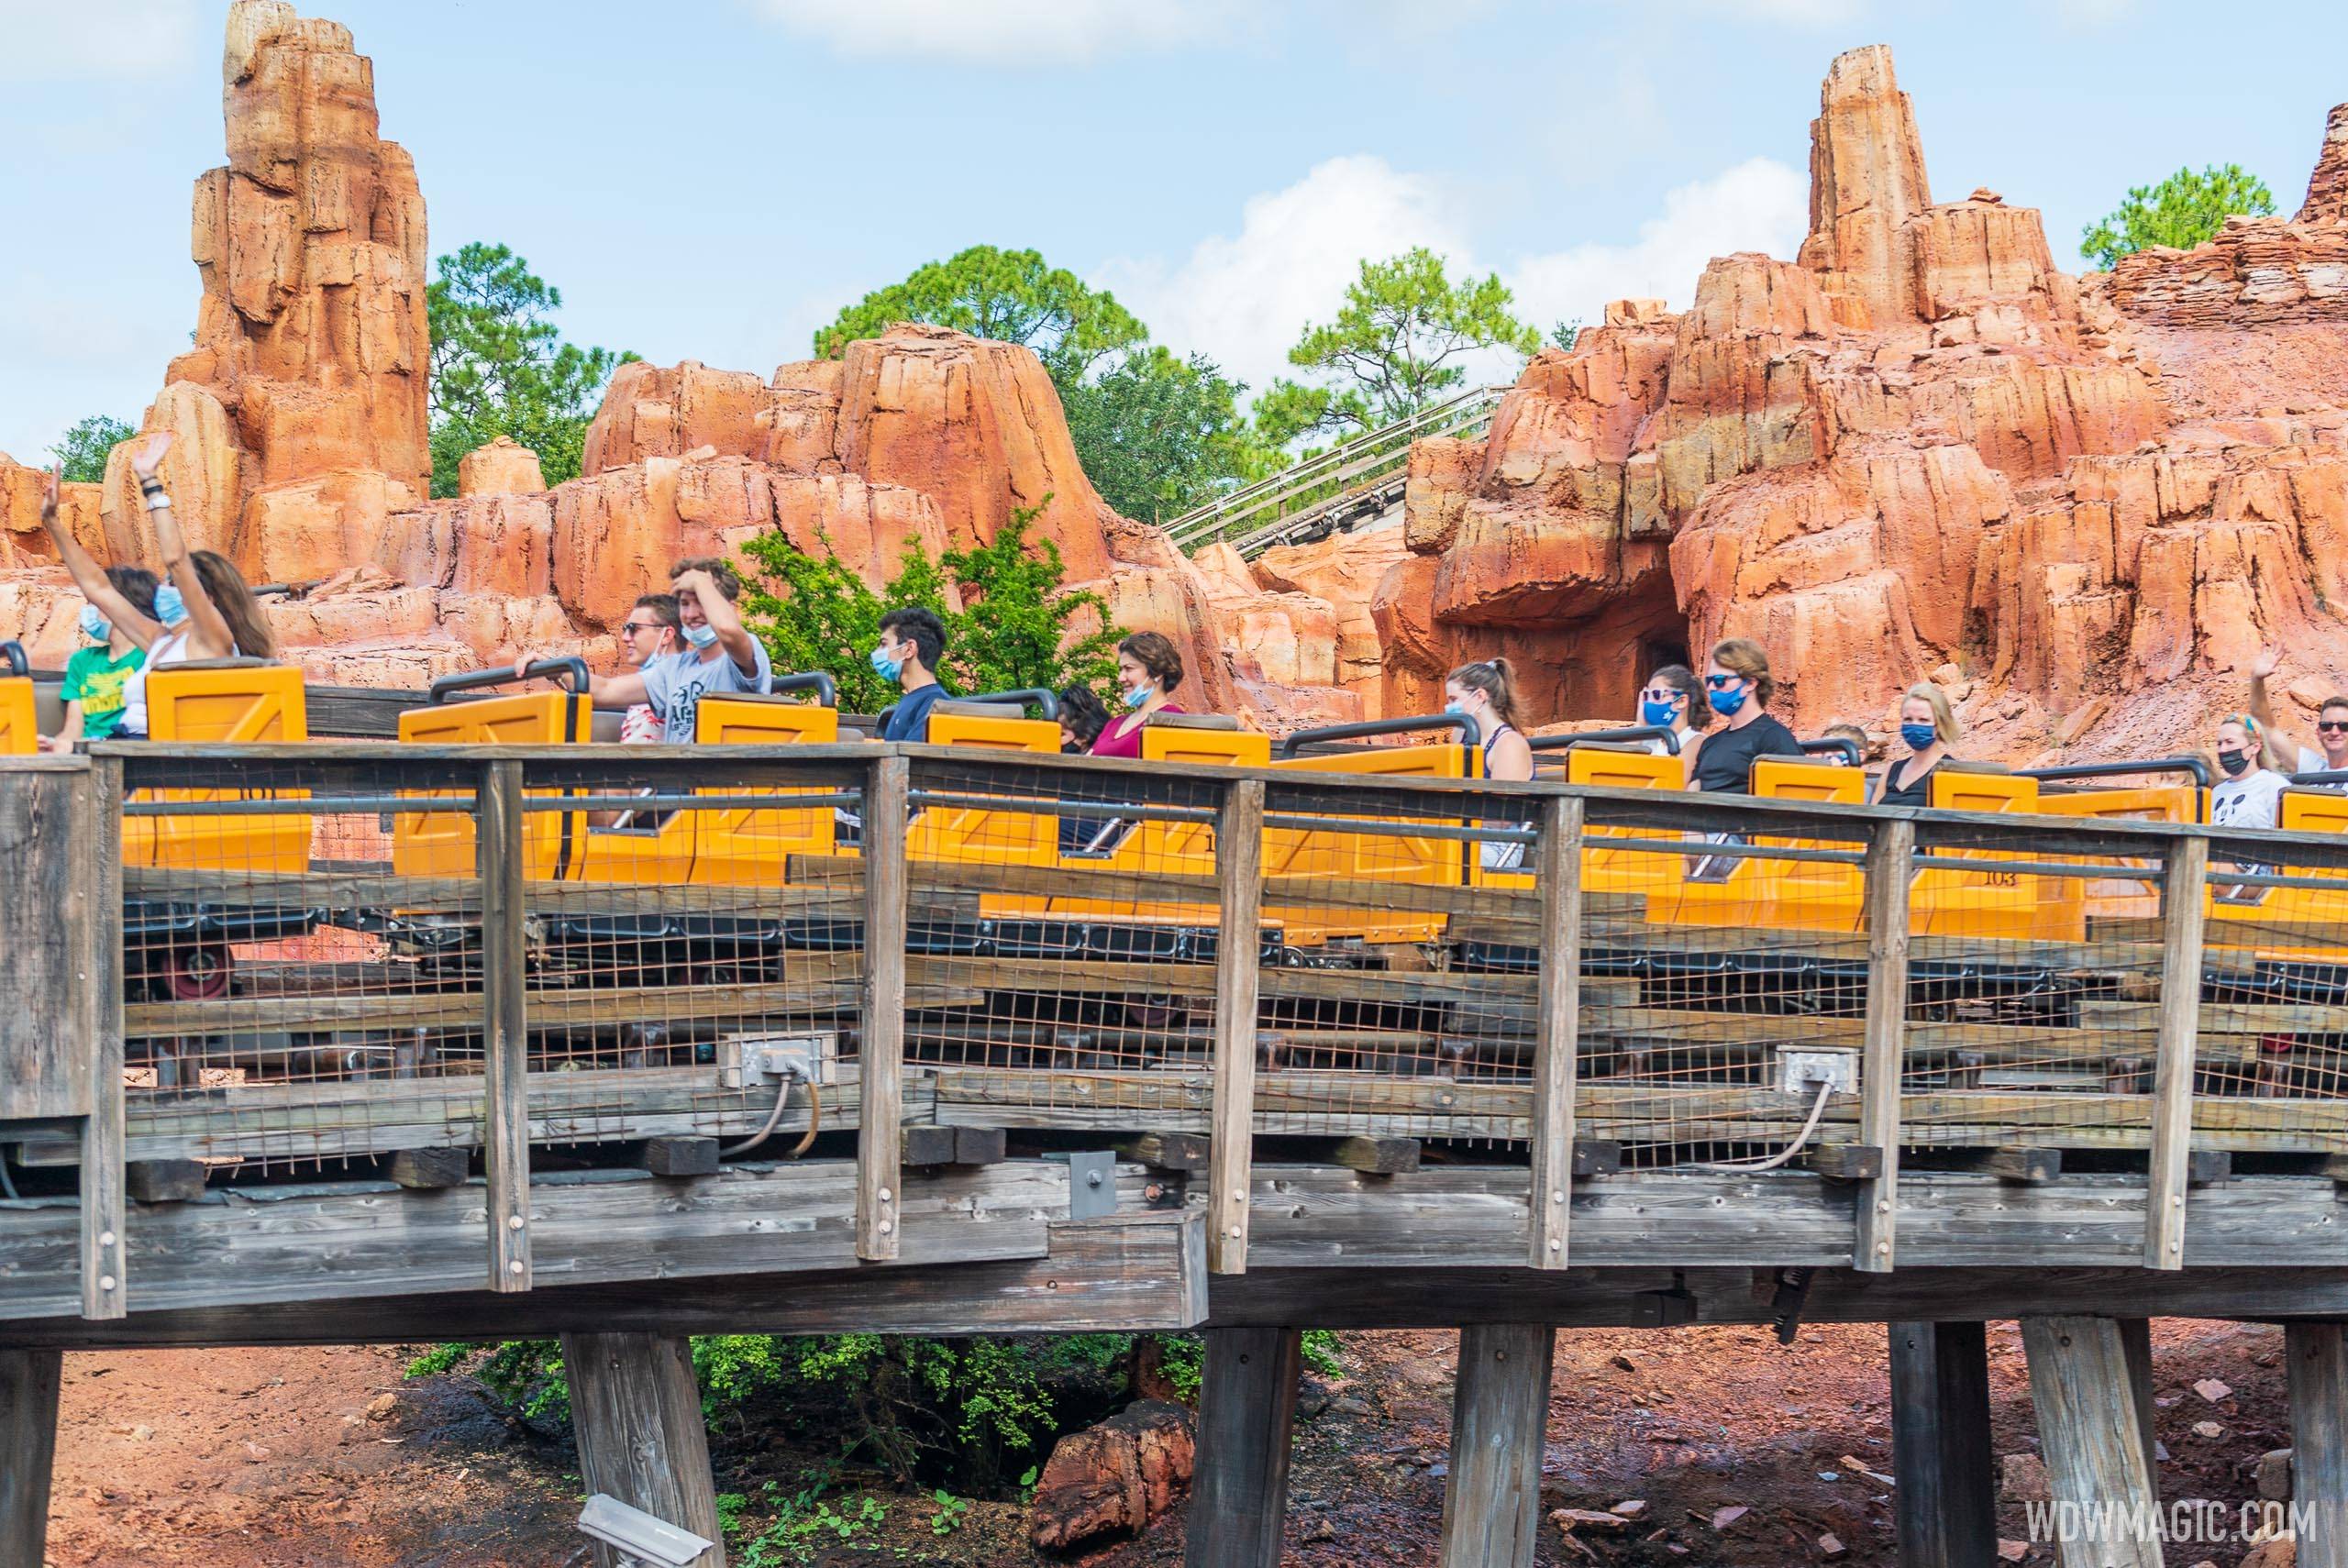 Masks required on Big Thunder Mountain railroad